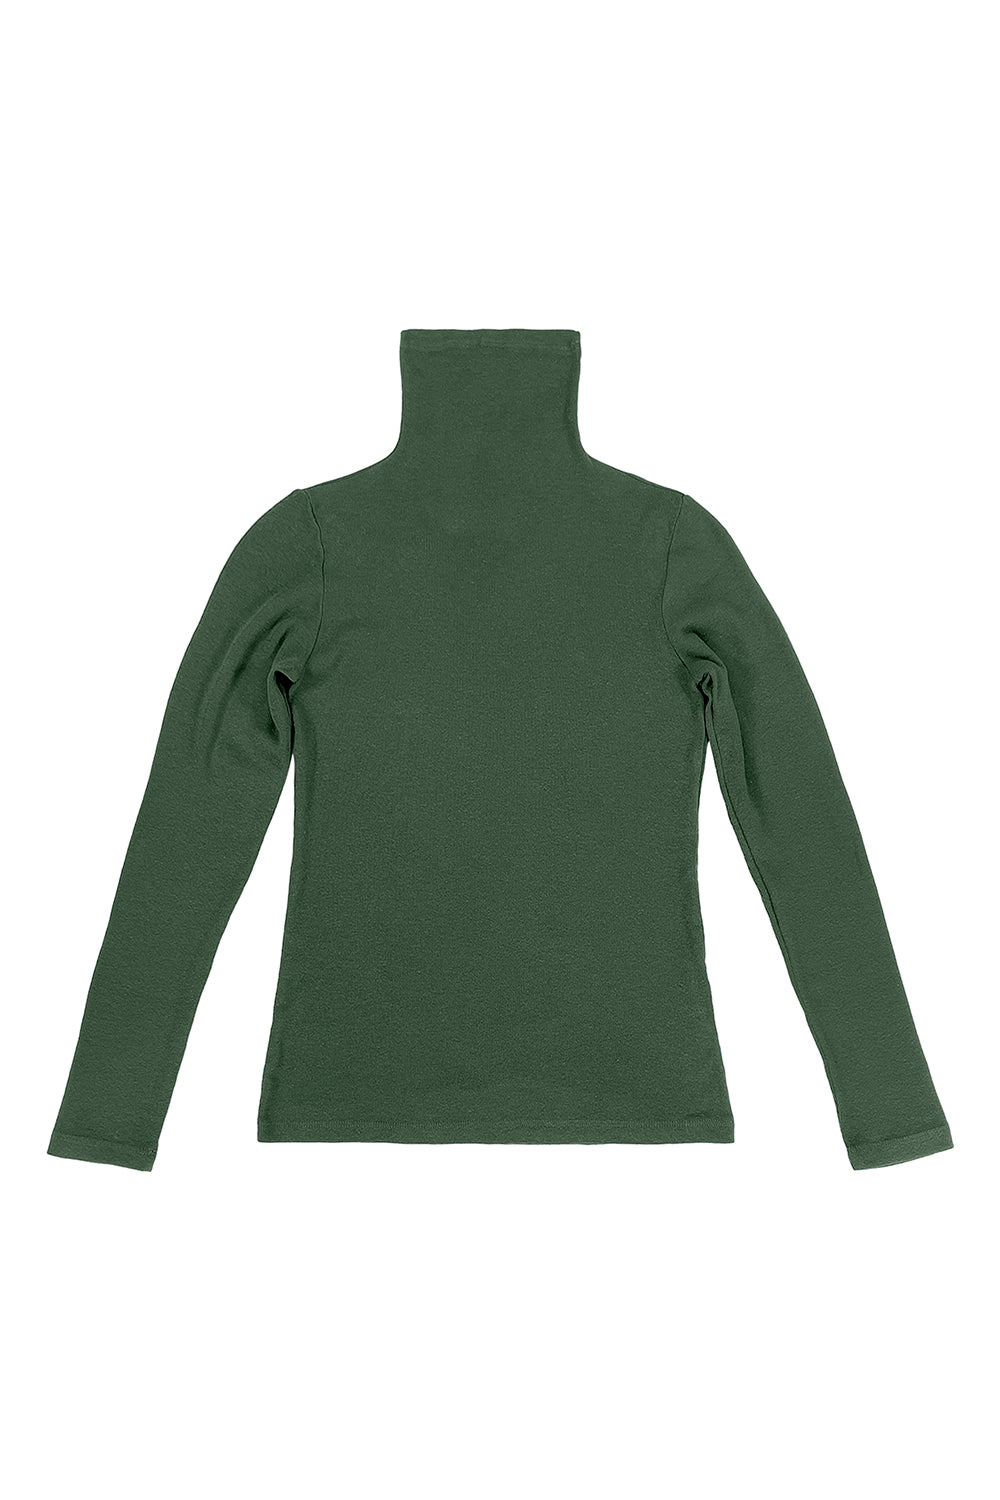 Whidbey Turtleneck | Jungmaven Hemp Clothing & Accessories / Color: Hunter Green